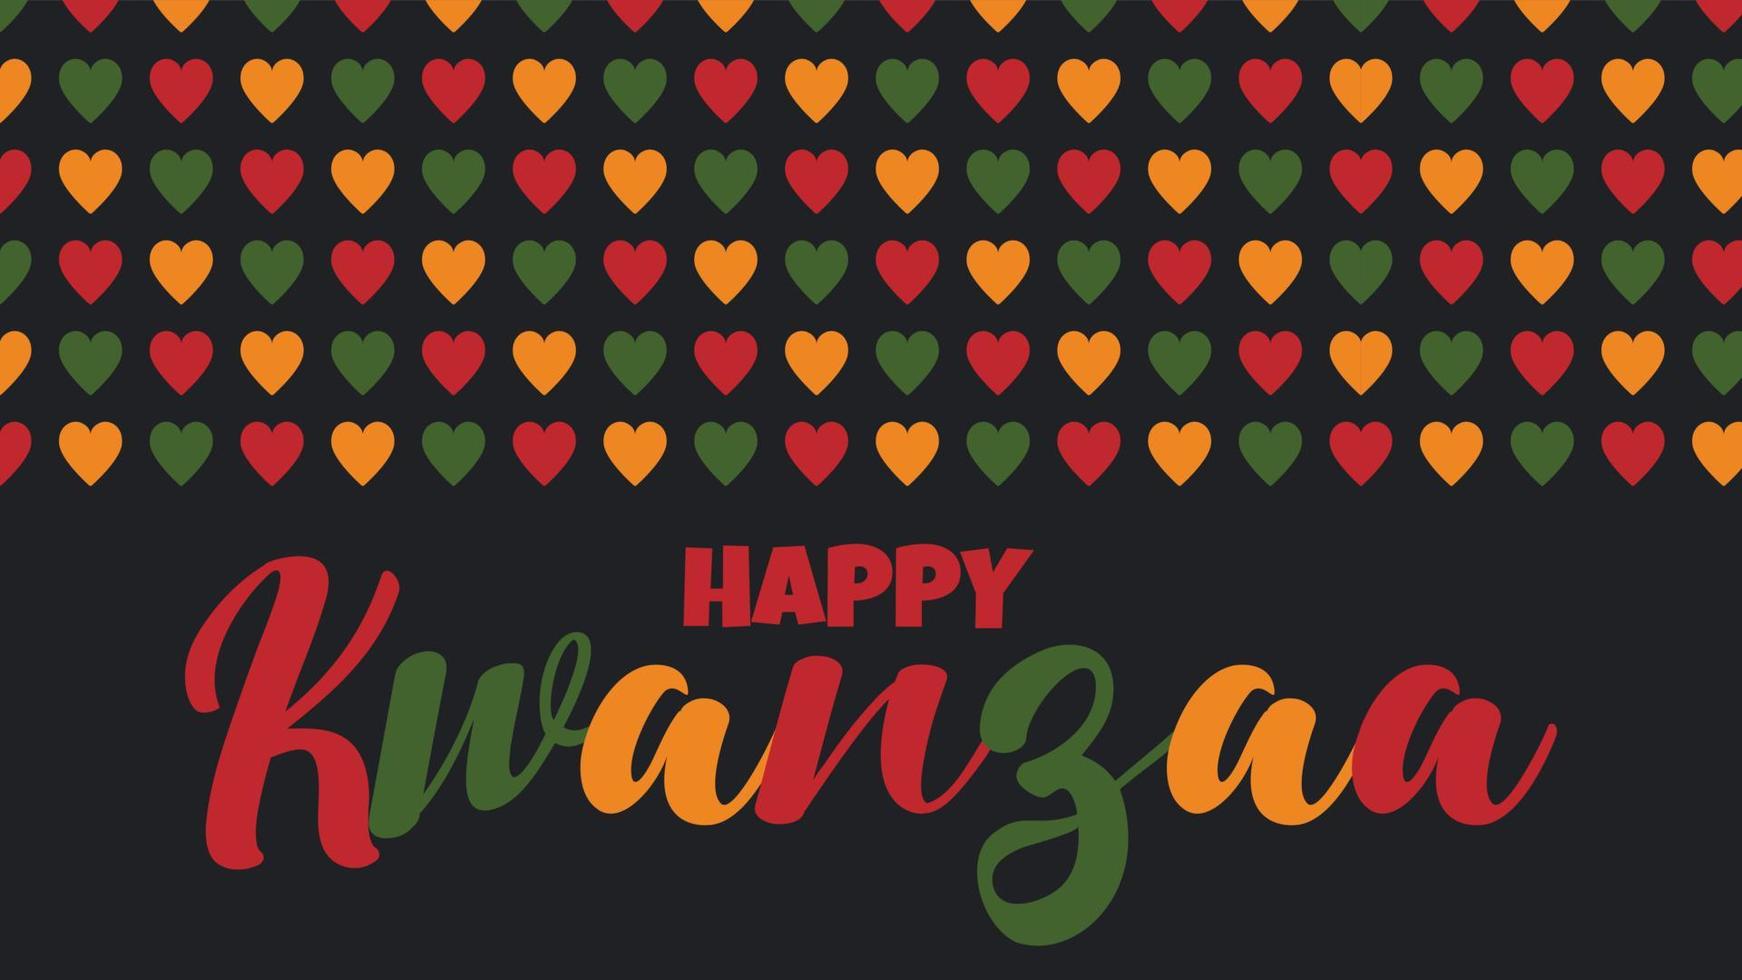 Happy Kwanzaa banner - African-American celebration in USA. Vector illustration with text, border pattern with hearts in traditional African colors - green, red, yellow on black. Greeting card